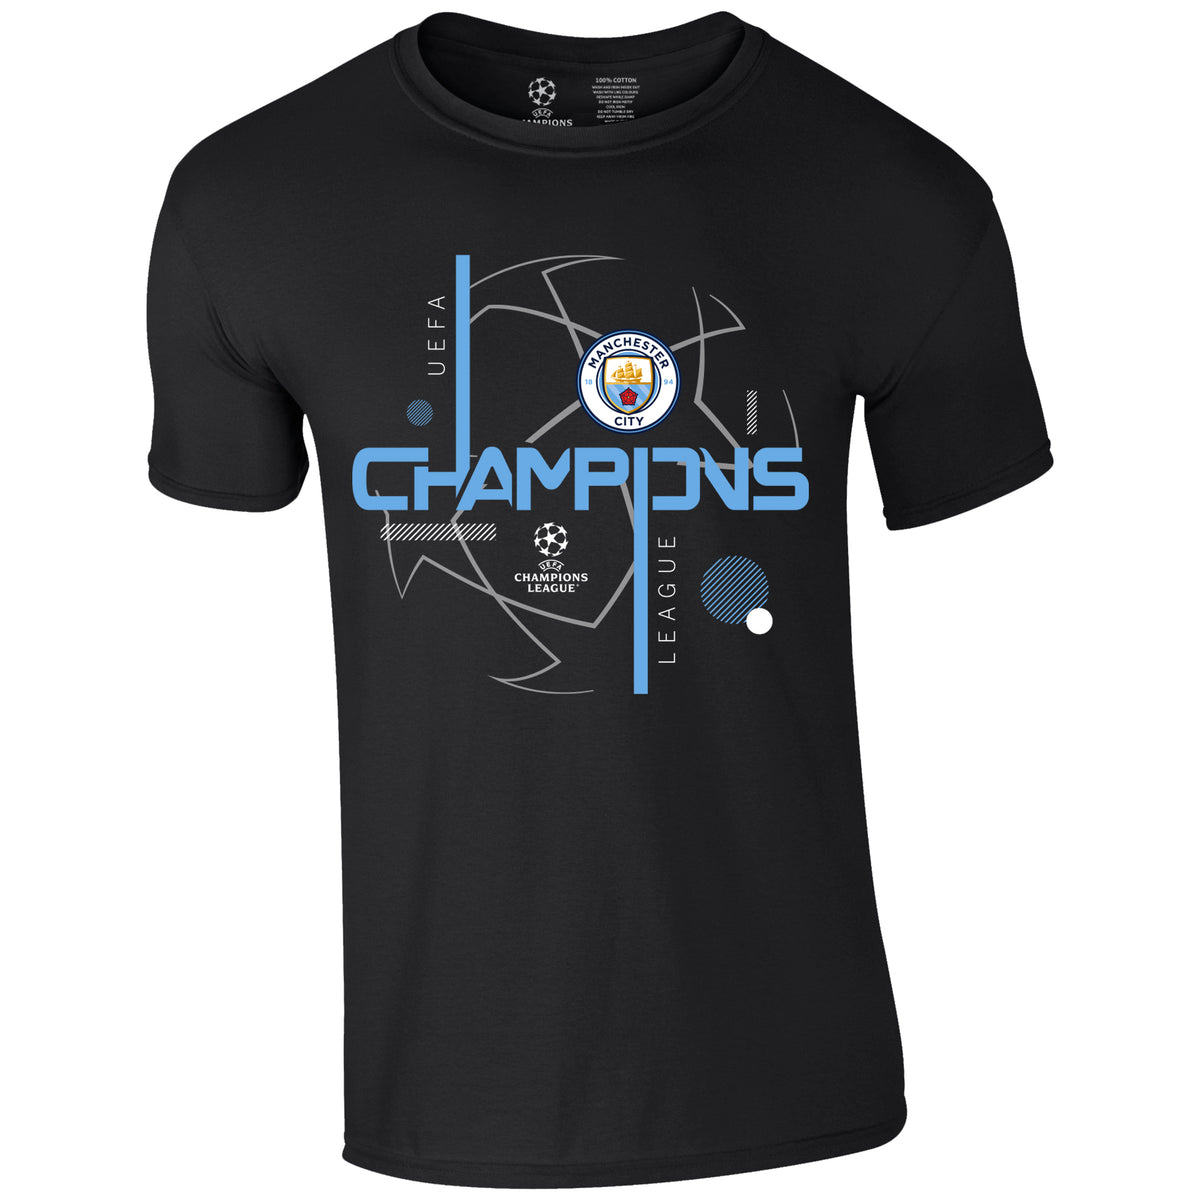 Champions League Manchester City Starball T-Shirt Black